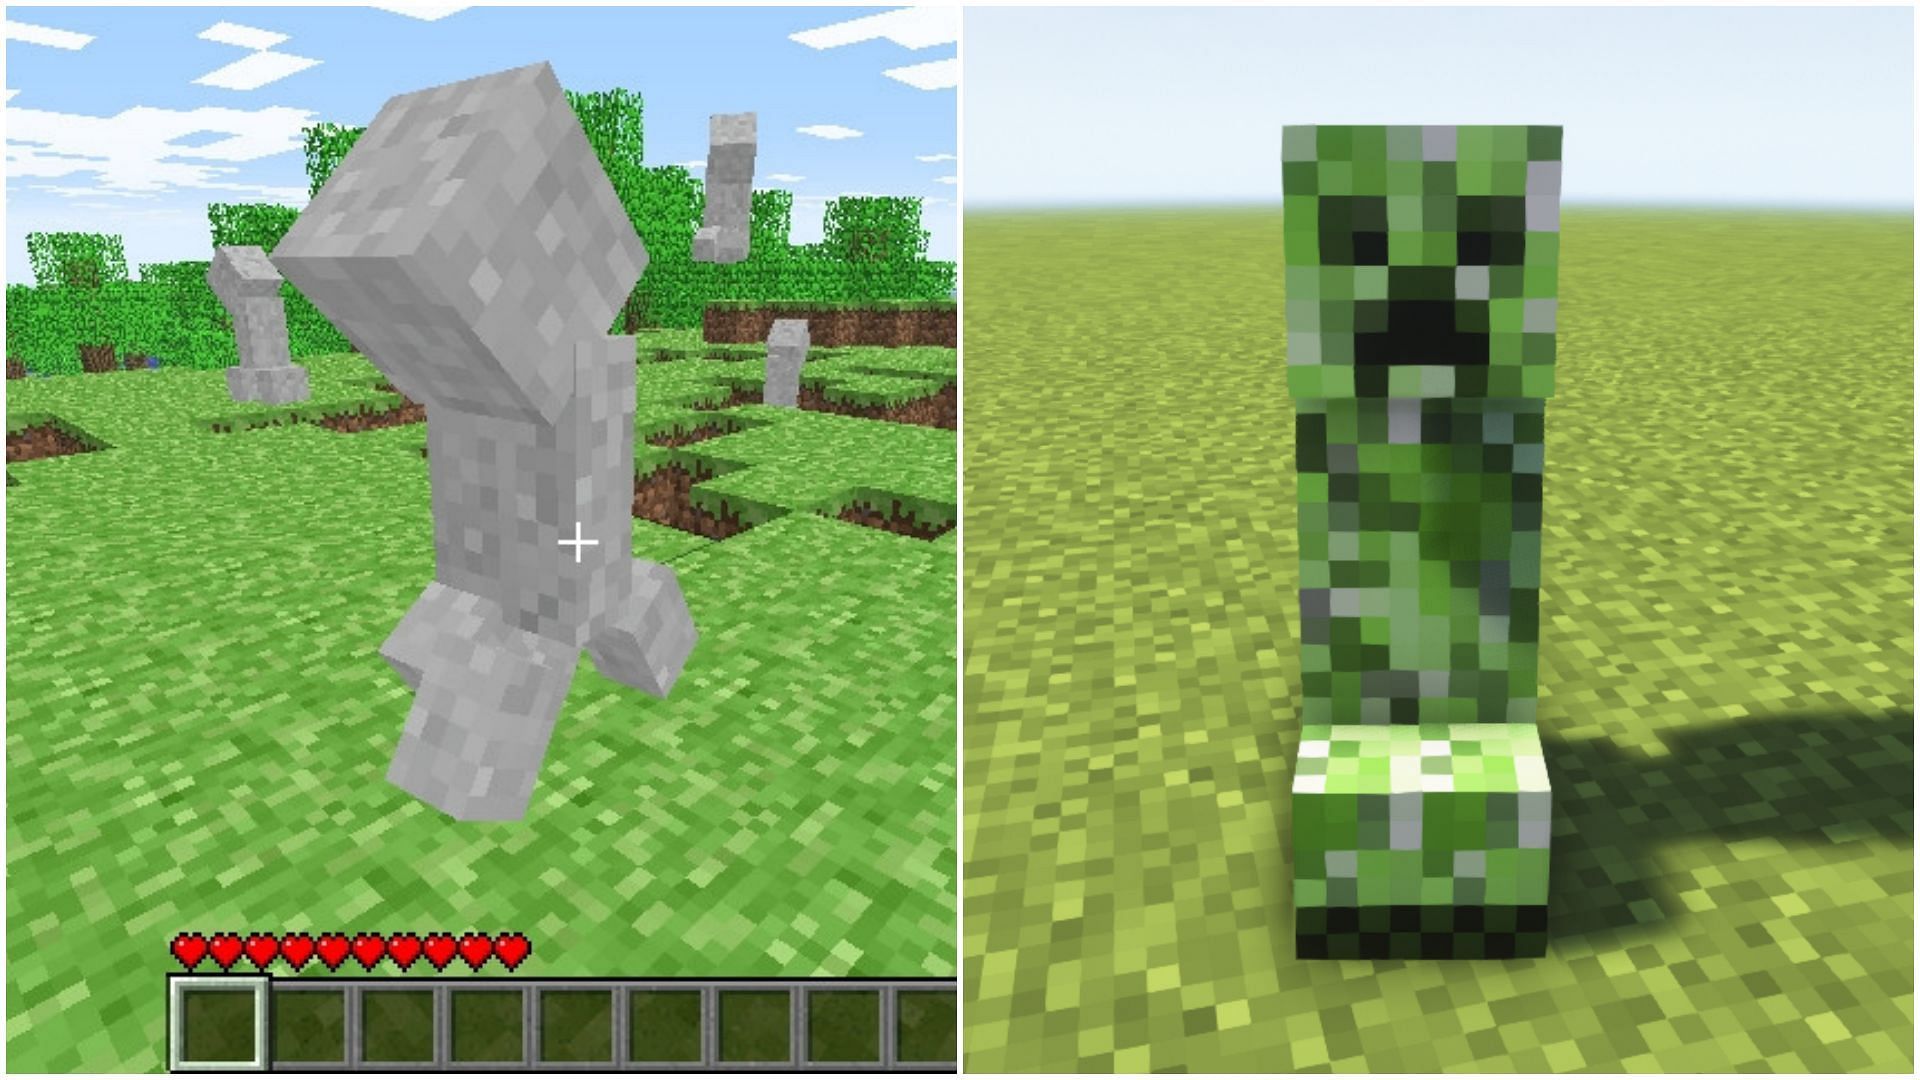 Creepers were created by accident while modeling pigs (Image via Mojang Studios)